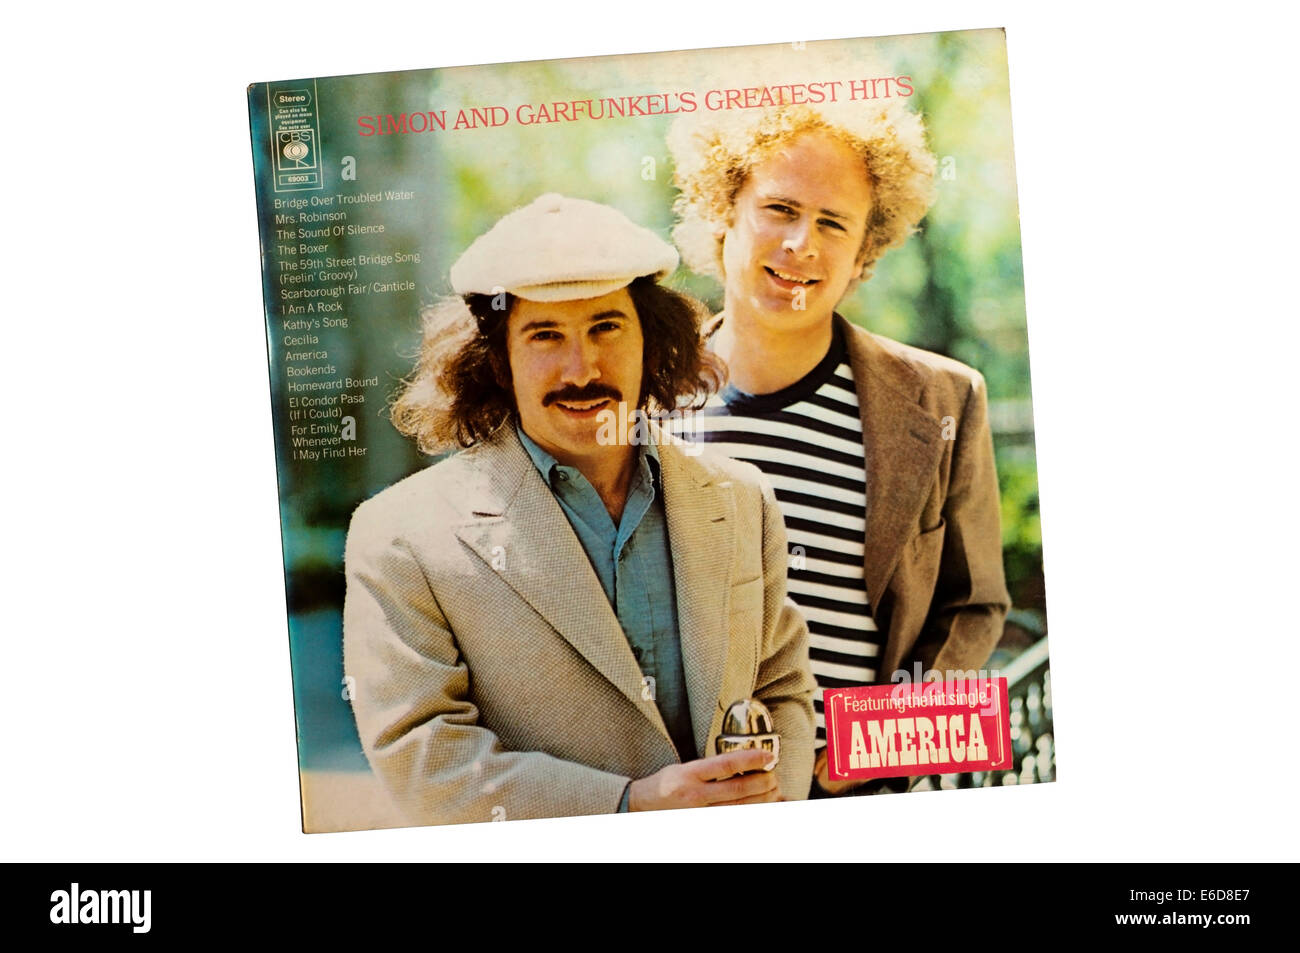 Greatest hits record album Cut Out Stock Images & Pictures - Alamy